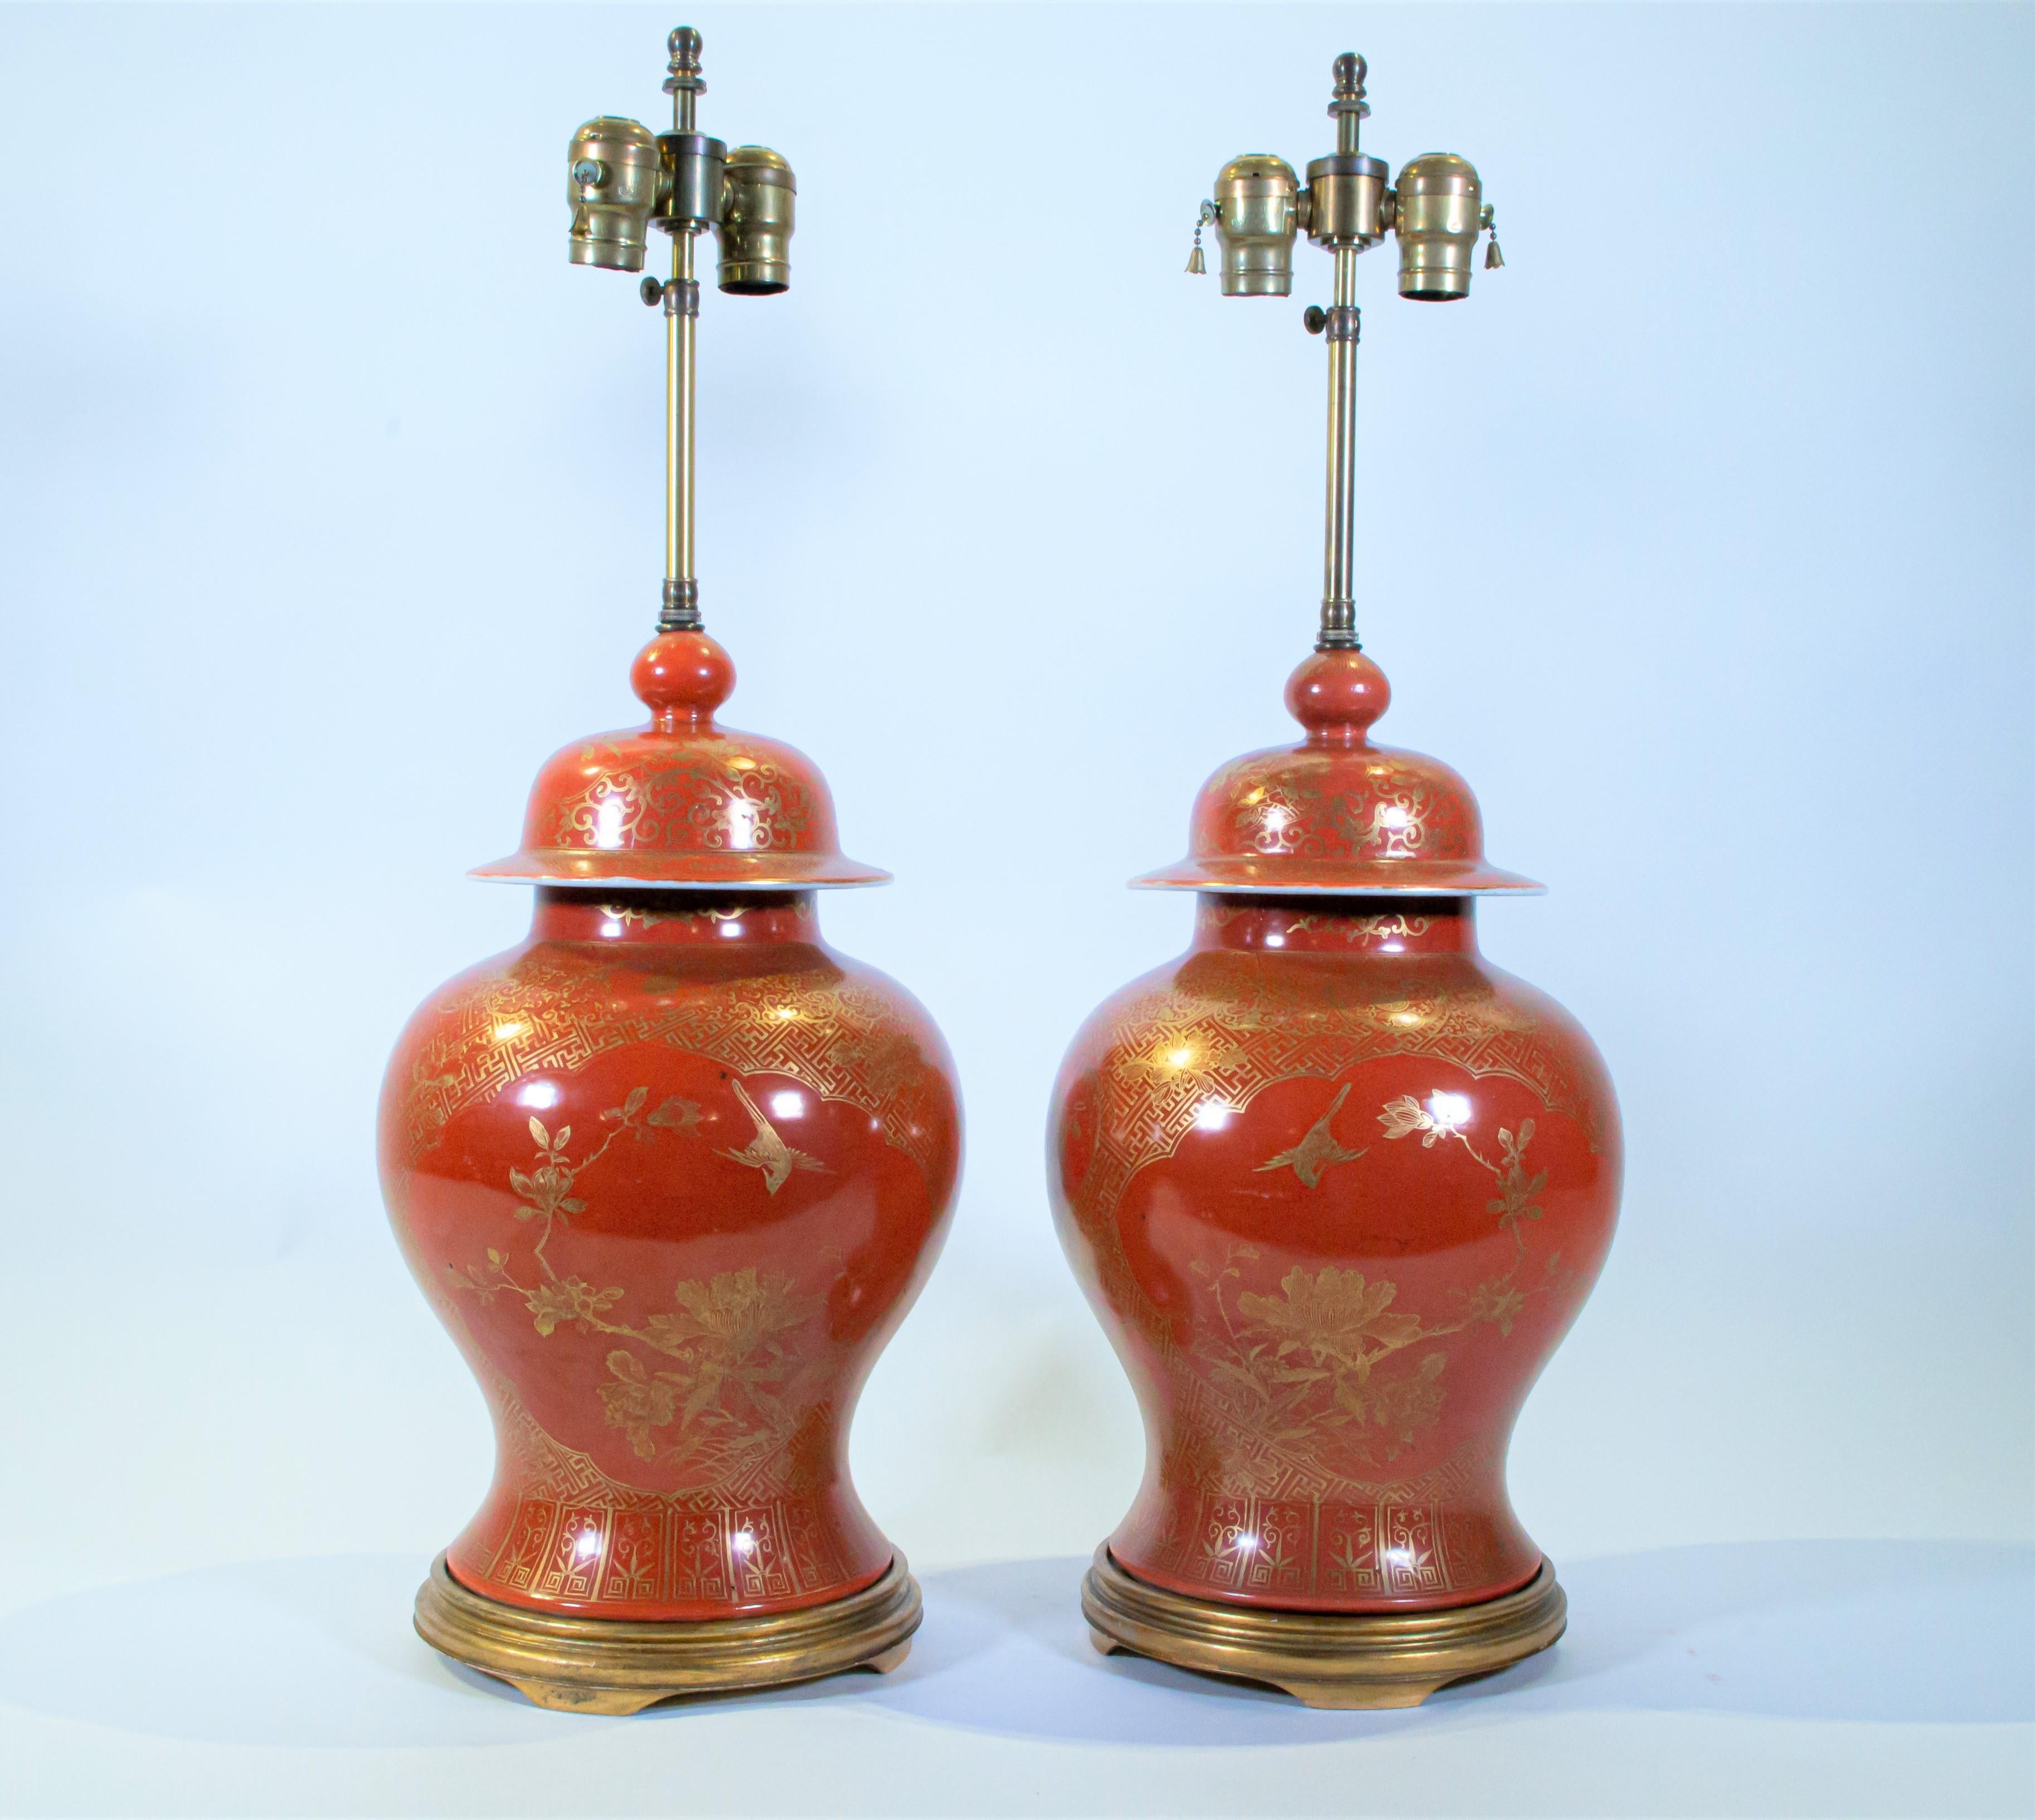 A Pair of Antique 19th Century Chinese Export Orange Ground and 24K Gilt Decorated Vases later turned to Lamps. This is a truly beautiful pair of lamps. The orange color is rarely seen in Chinese porcelain and to further enhance the vibrancy of